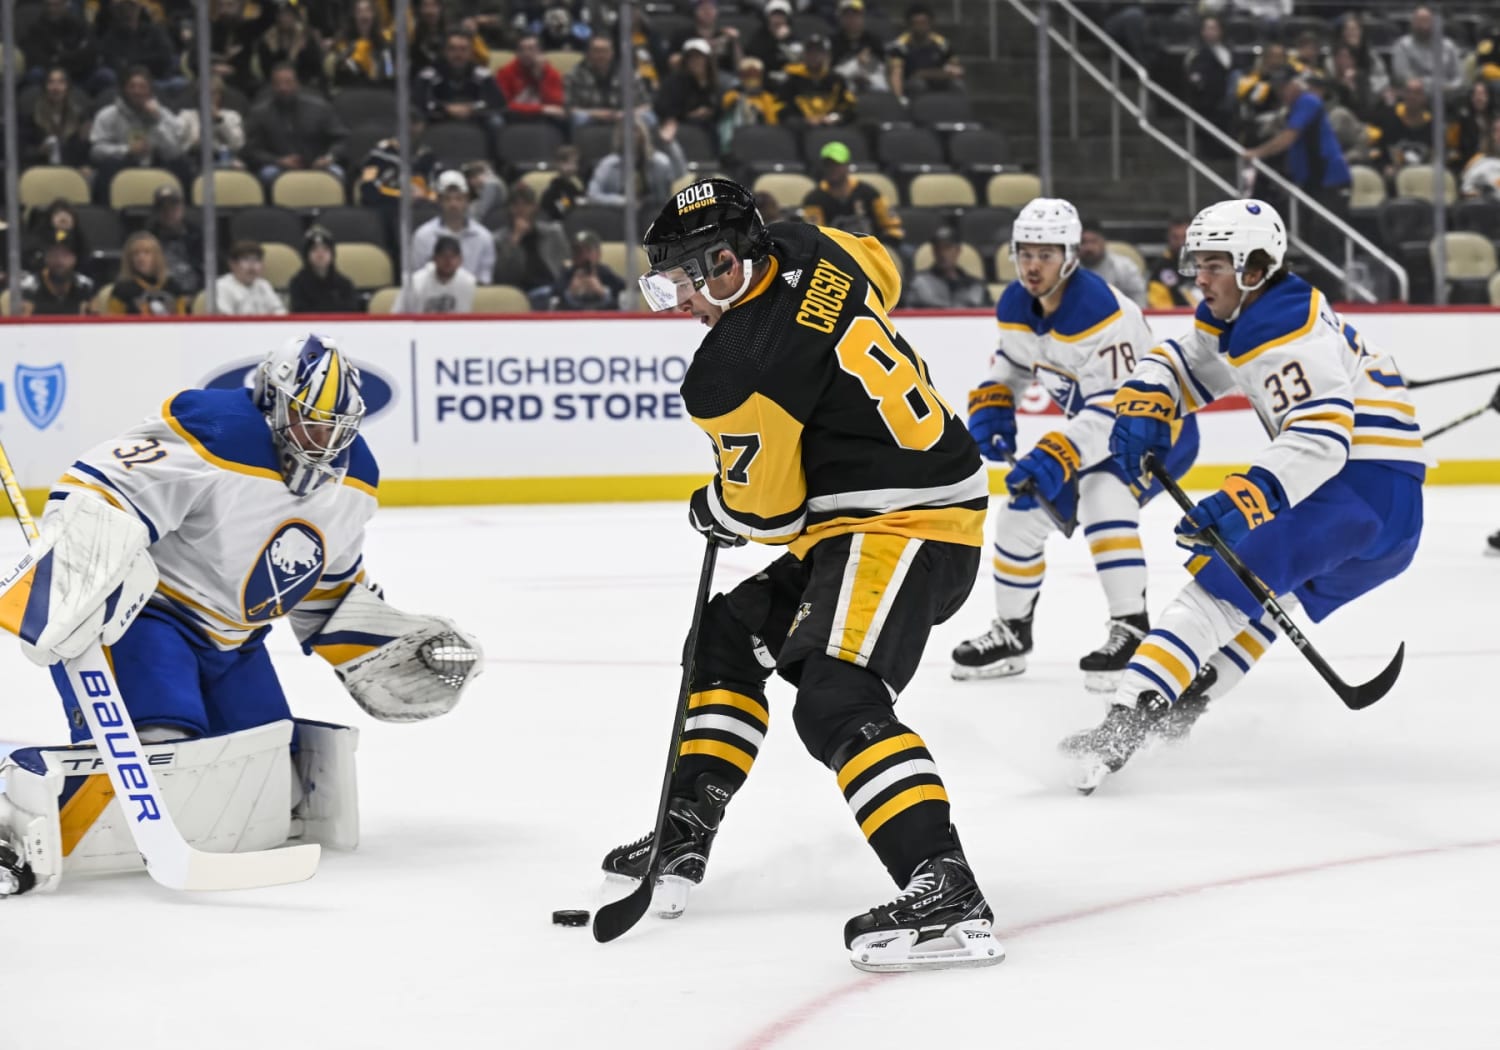 Skate report: Penguins' Pride Night shows 'game is willing to grow